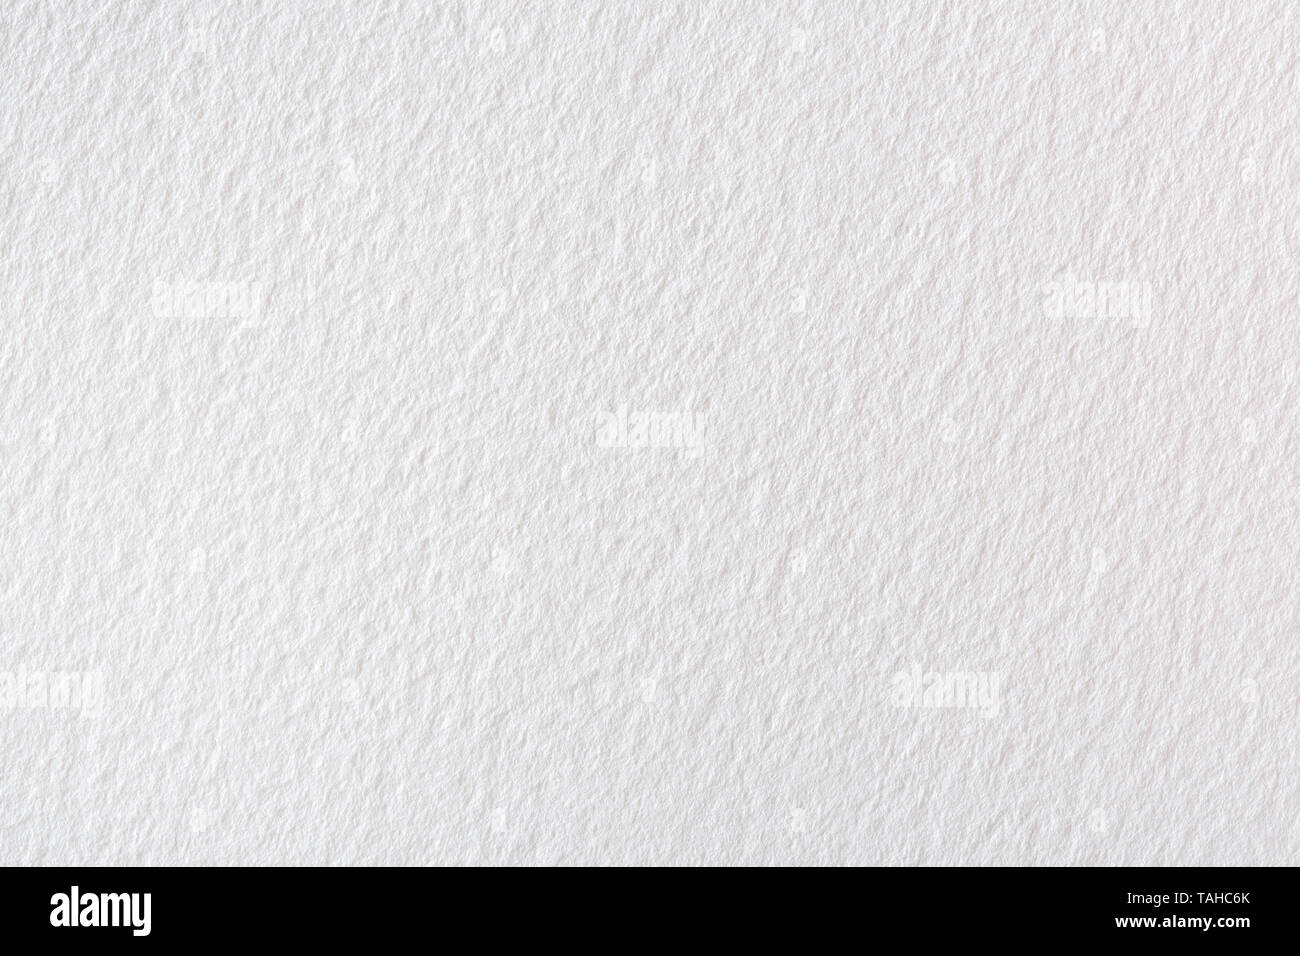 High quality white paper texture, background. High resolution photo. Stock Photo